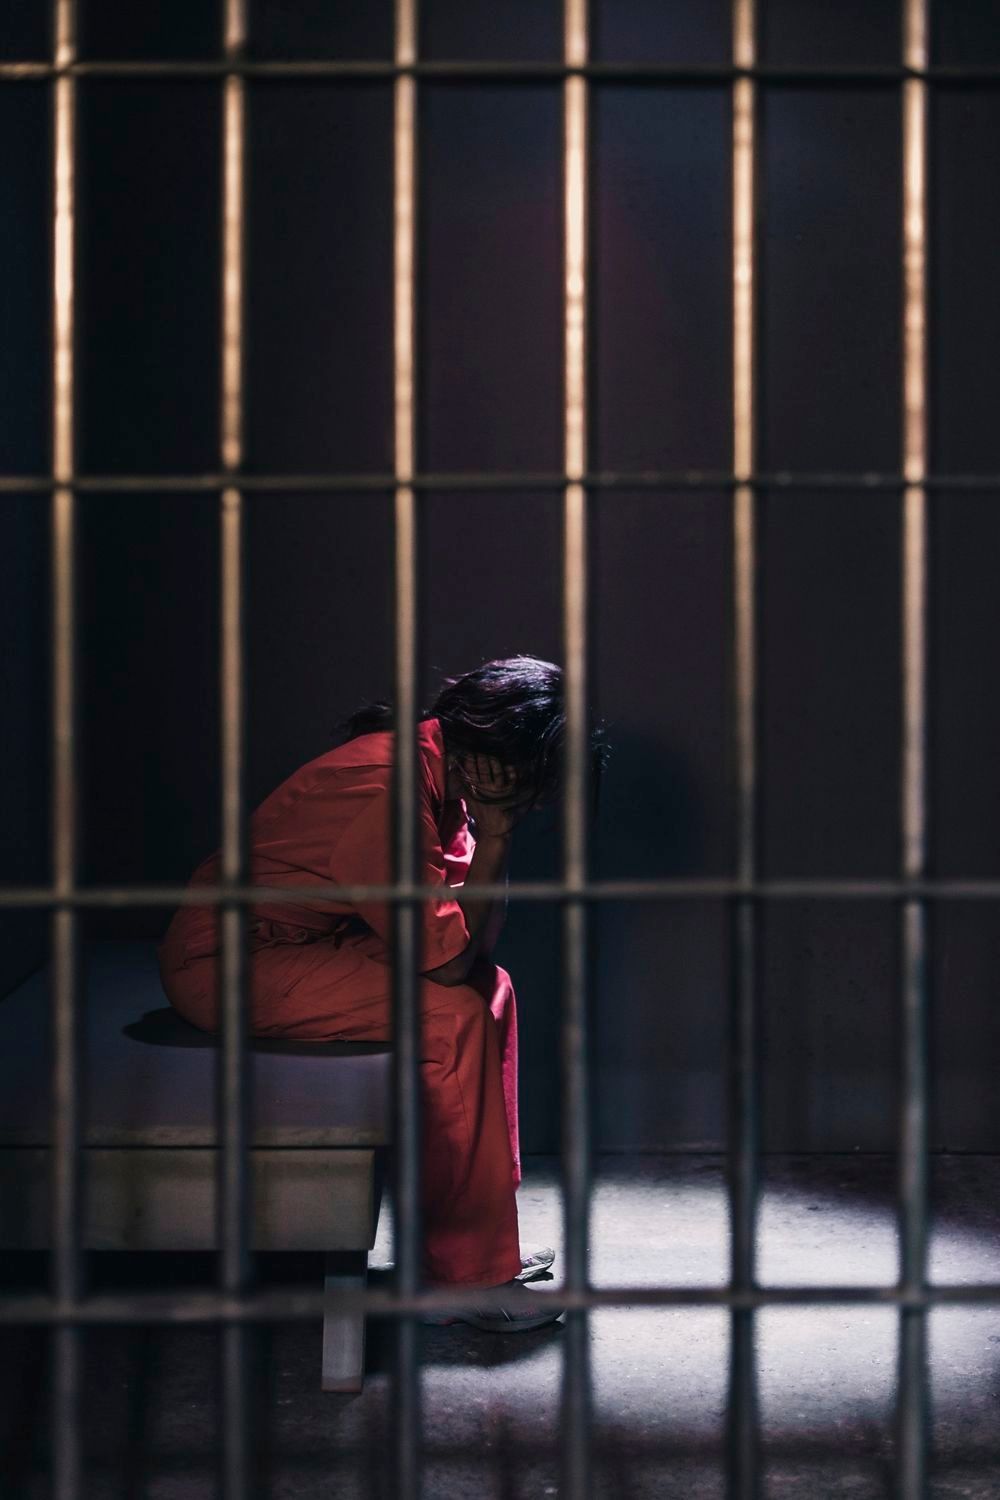 Woman in prison cell